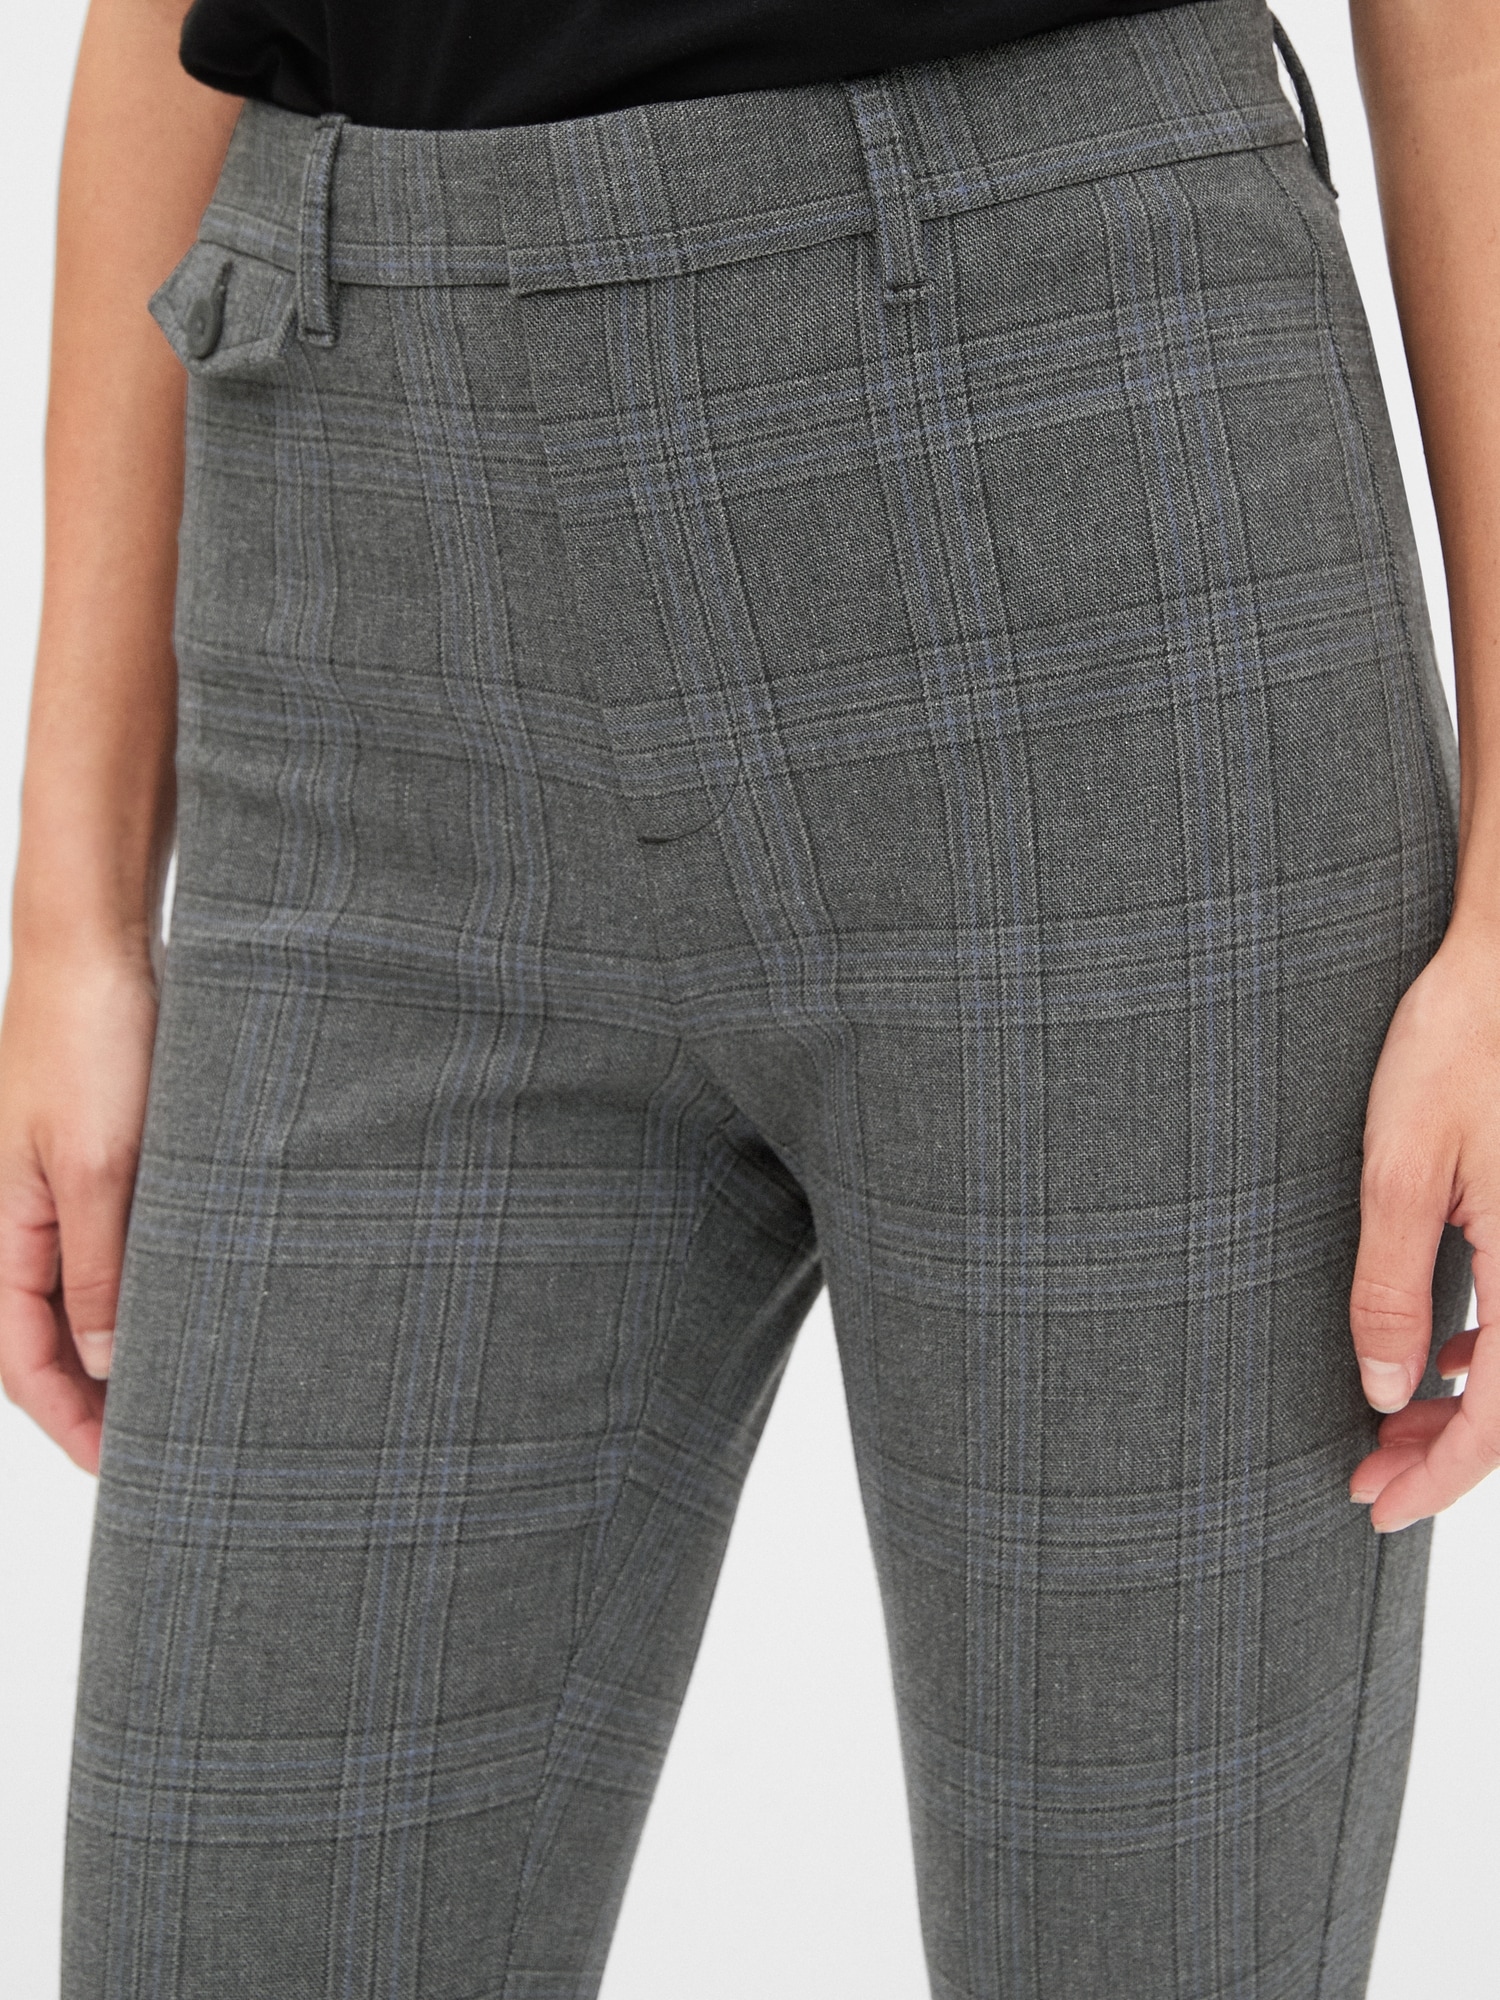 Gap Slim ankle high rise pants womens size 16 Tall Nwt plaid Belt Loops  Casual Multiple - $49 New With Tags - From Blooming